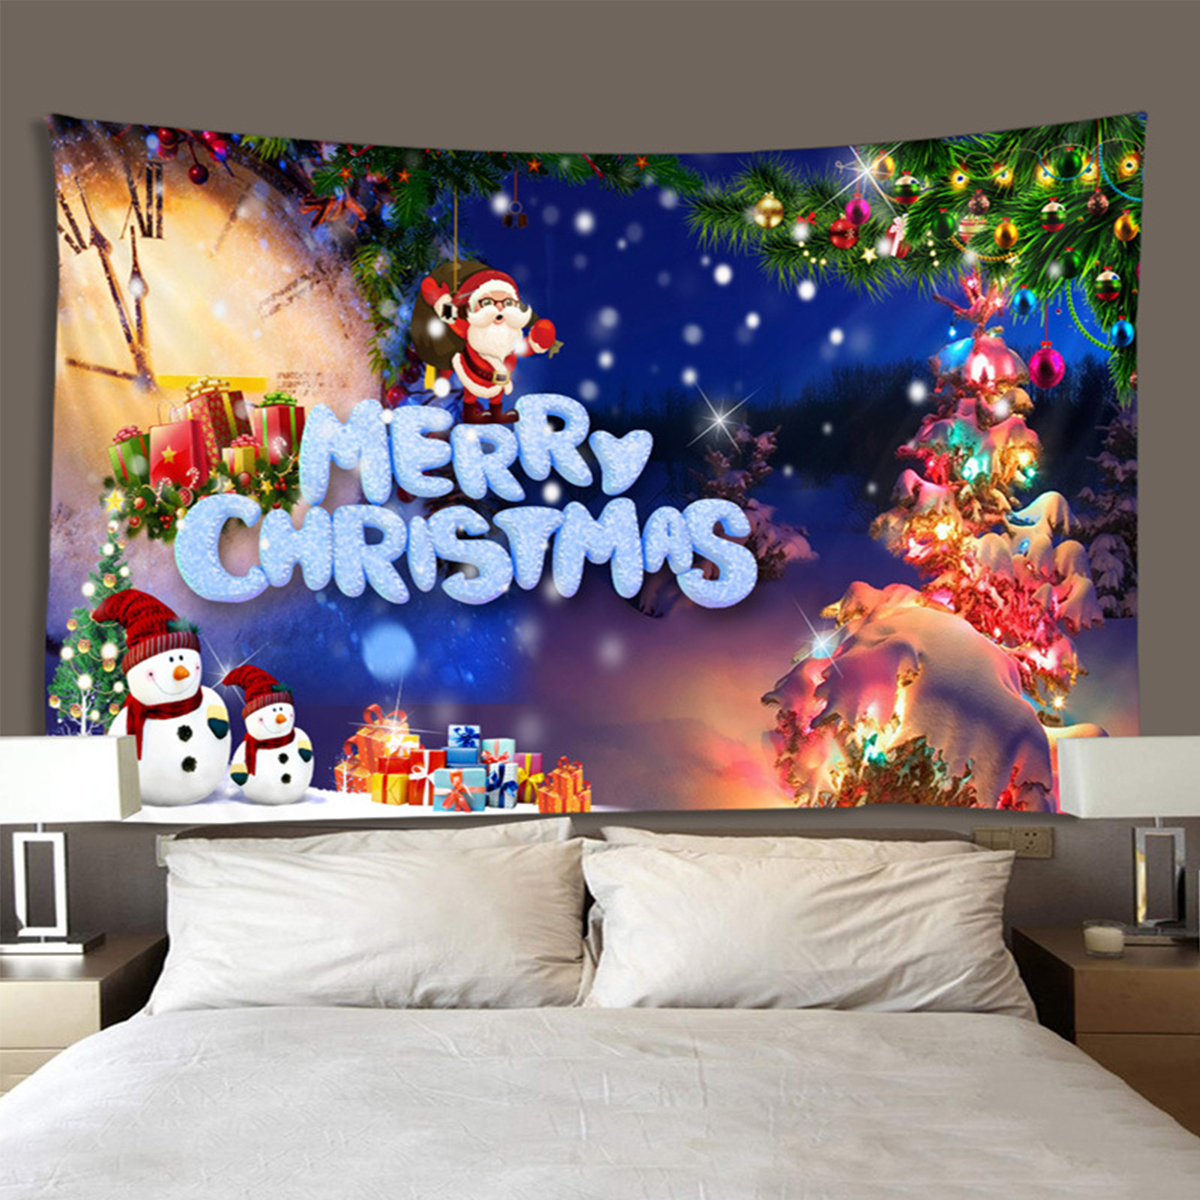 Christmas-Santa-Claus-Tapestry-Wall-Hanging-Winter-Bedspread-Throw-Blanket-Photography-Backdrop-Back-1912686-5